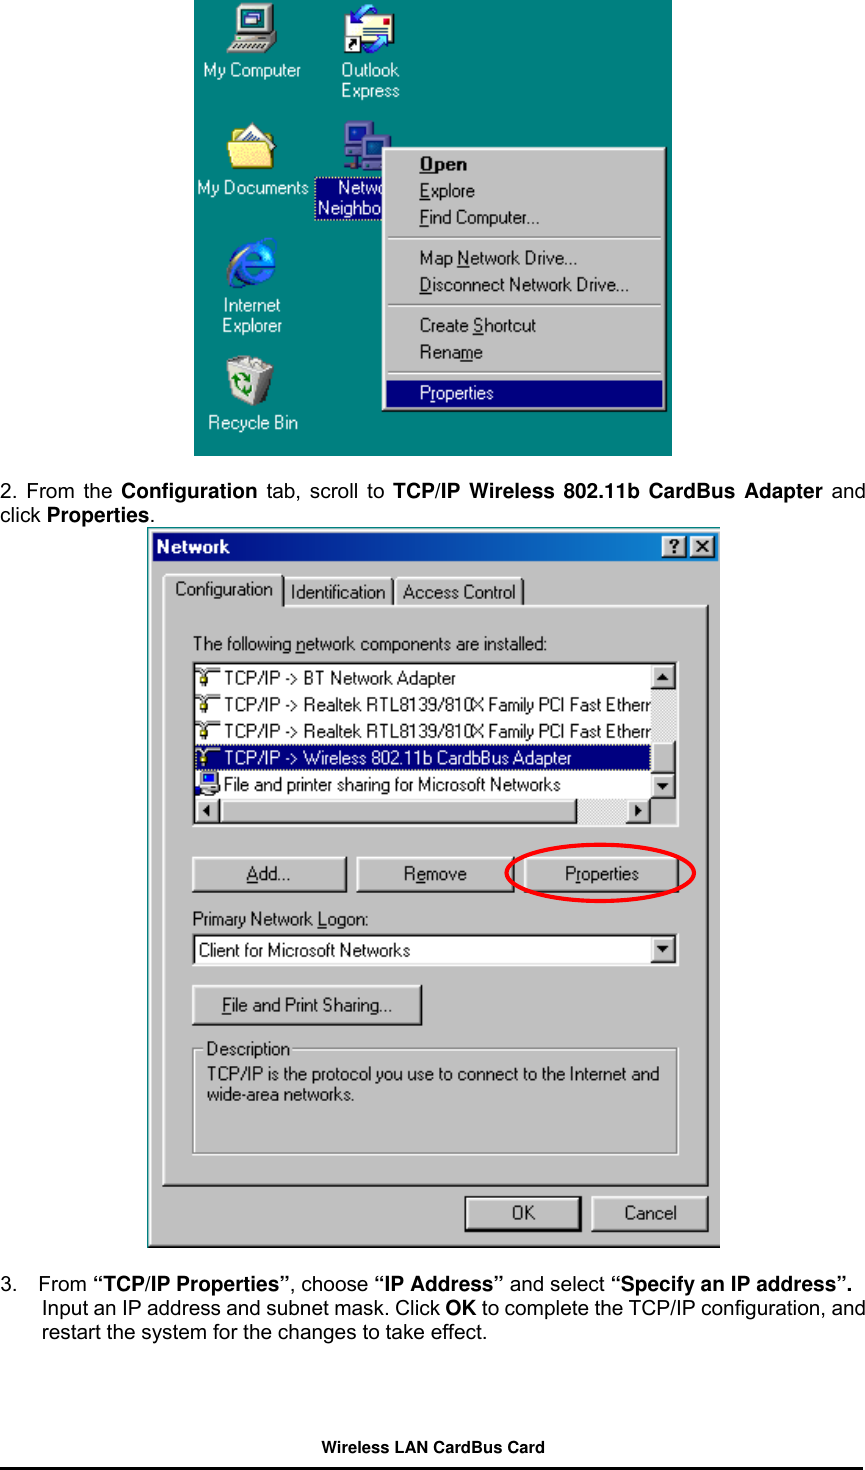   2. From the Configuration tab, scroll to TCP/IP Wireless 802.11b CardBus Adapter and click Properties.   3.  From “TCP/IP Properties”, choose “IP Address” and select “Specify an IP address”. Input an IP address and subnet mask. Click OK to complete the TCP/IP configuration, and restart the system for the changes to take effect. Wireless LAN CardBus Card 